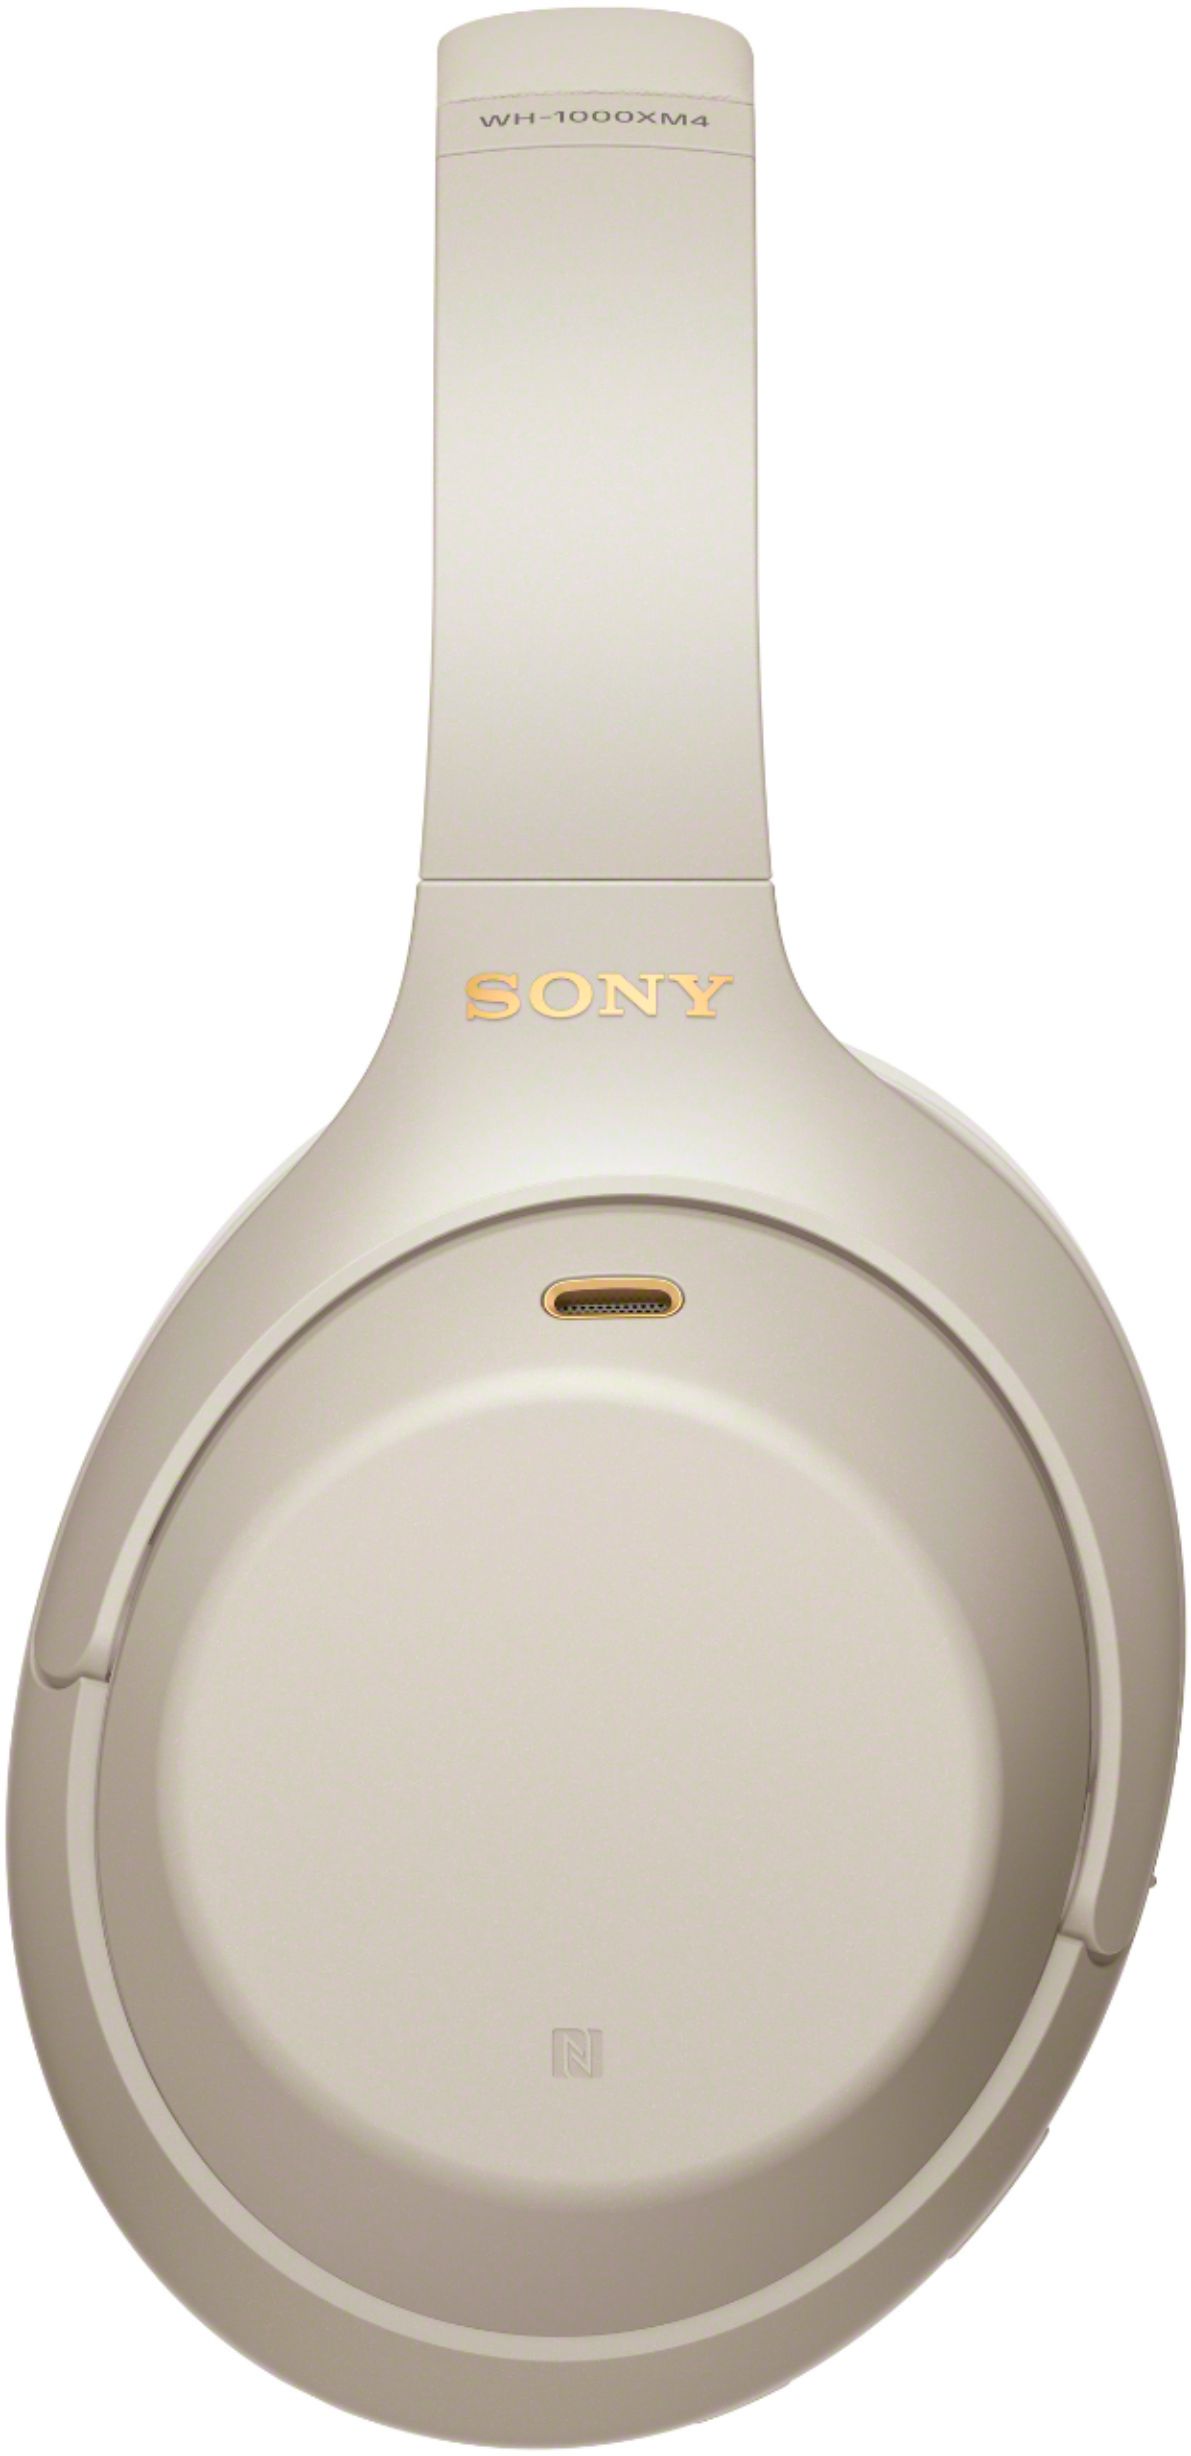 Sony WH-1000XM4 Wireless Noise-Cancelling Over-the-Ear Headphones Midnight  Blue 27242920958